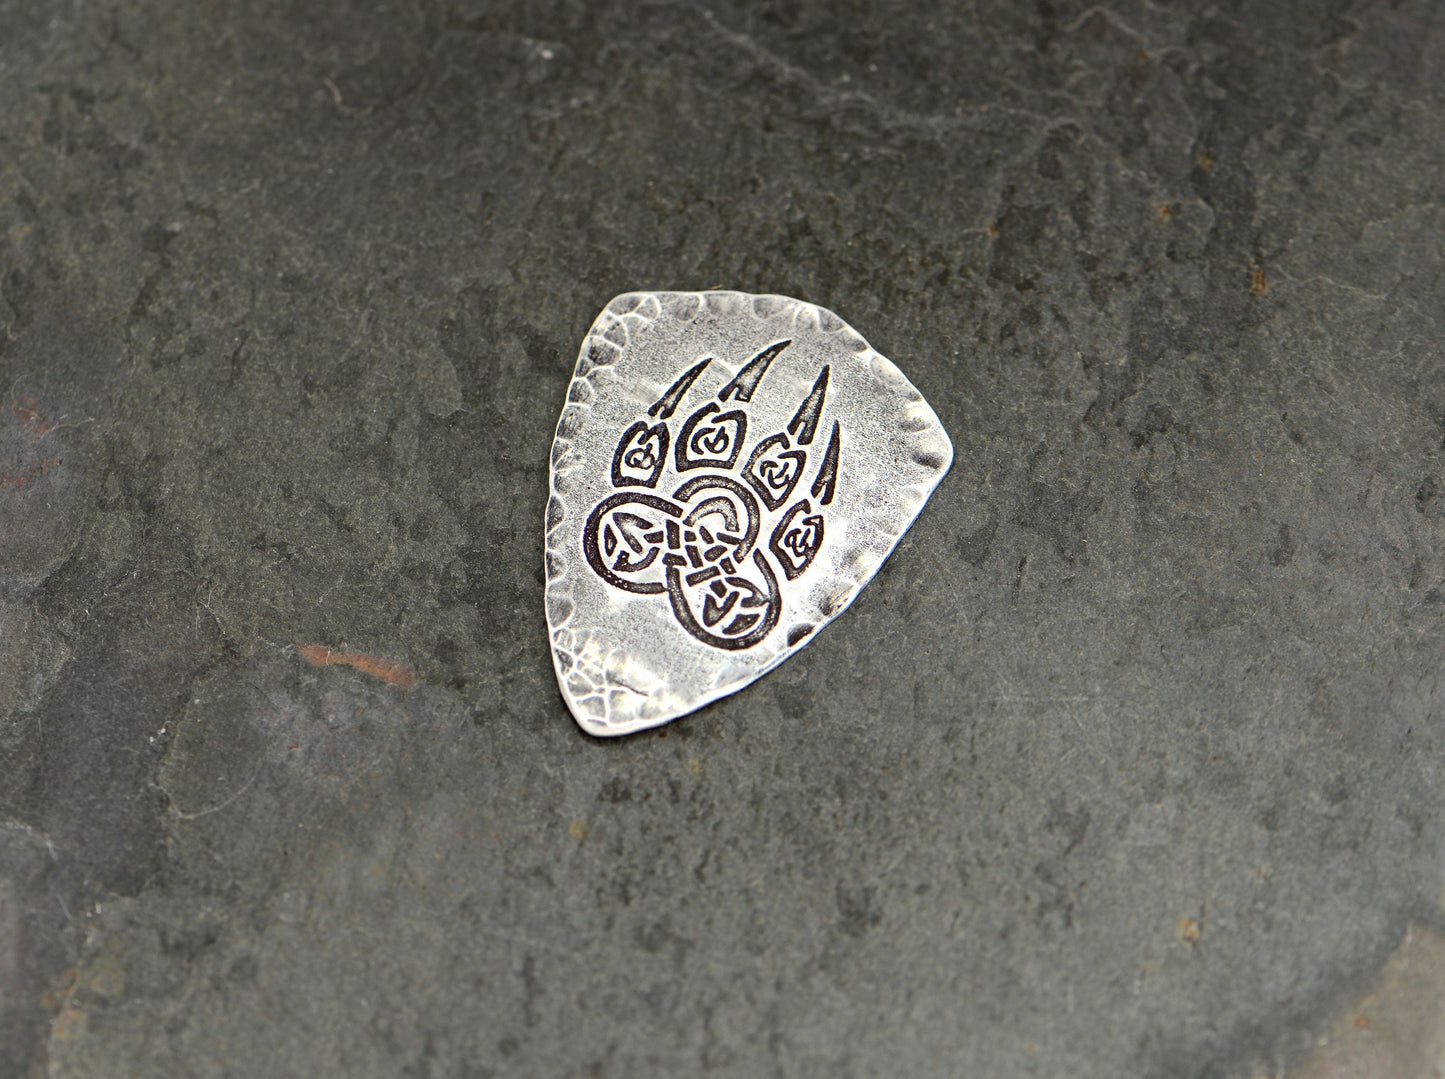 Bear claw in sterling silver shield guitar pick